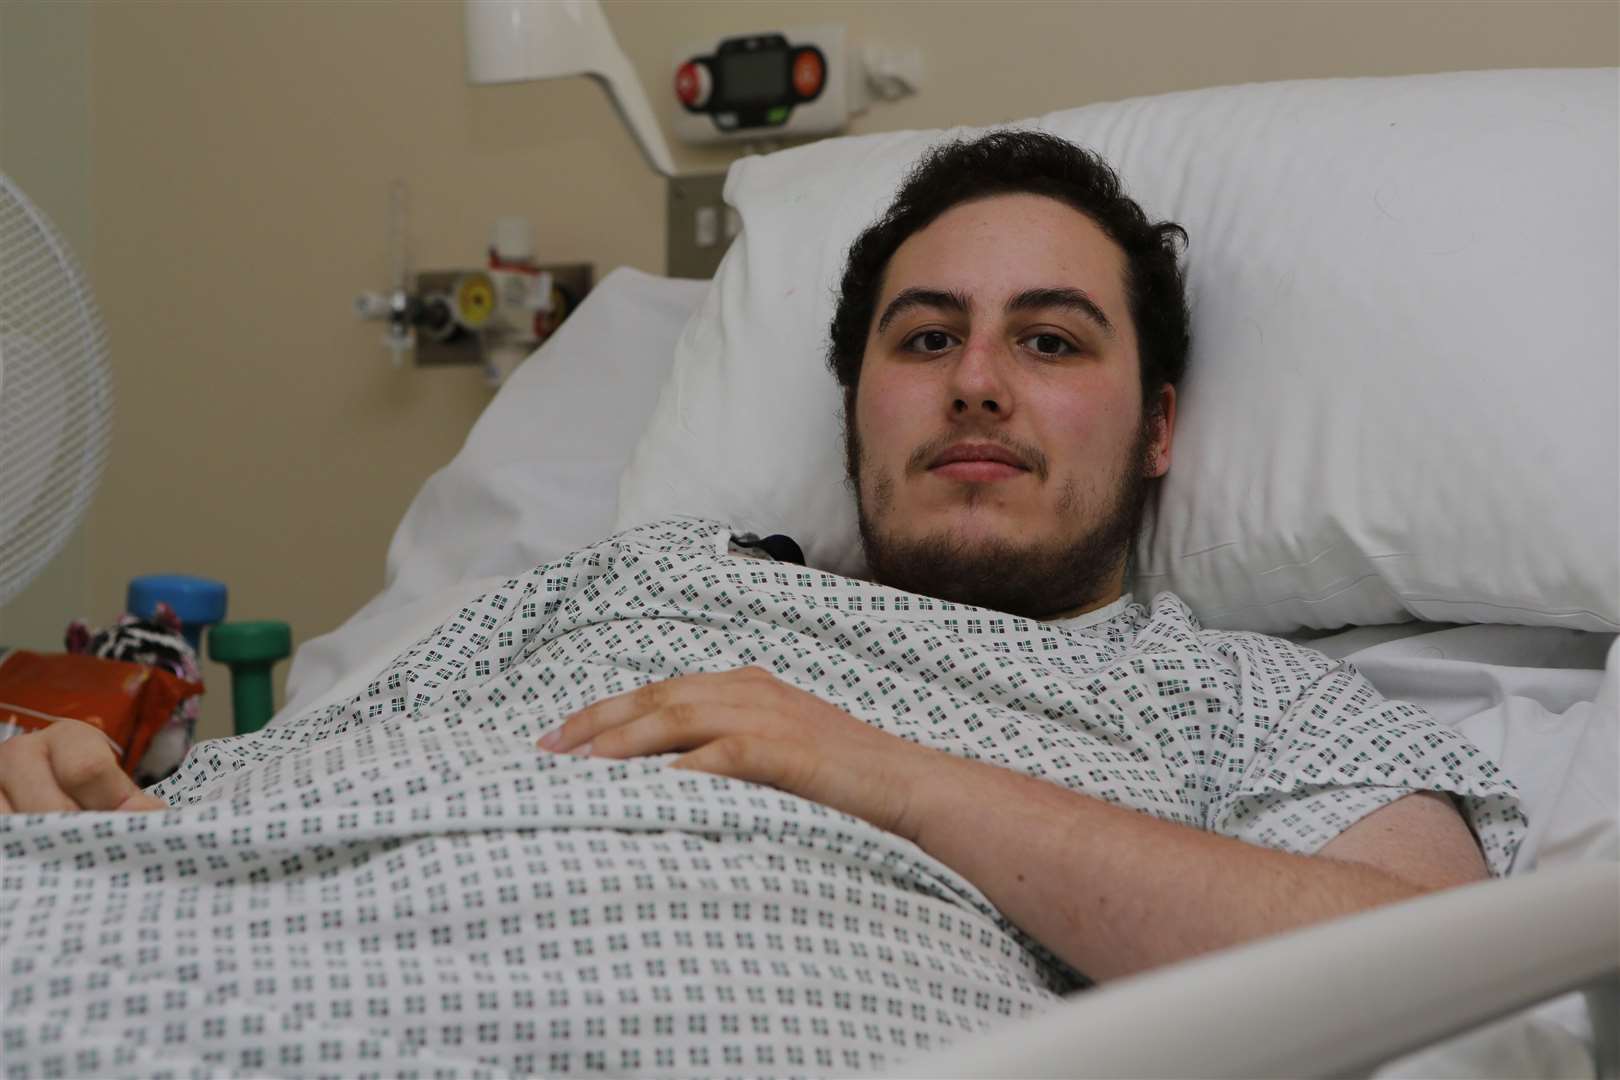 Louis Pilcher, 19, had a terrible motorbike accident and is now on the road to recovery